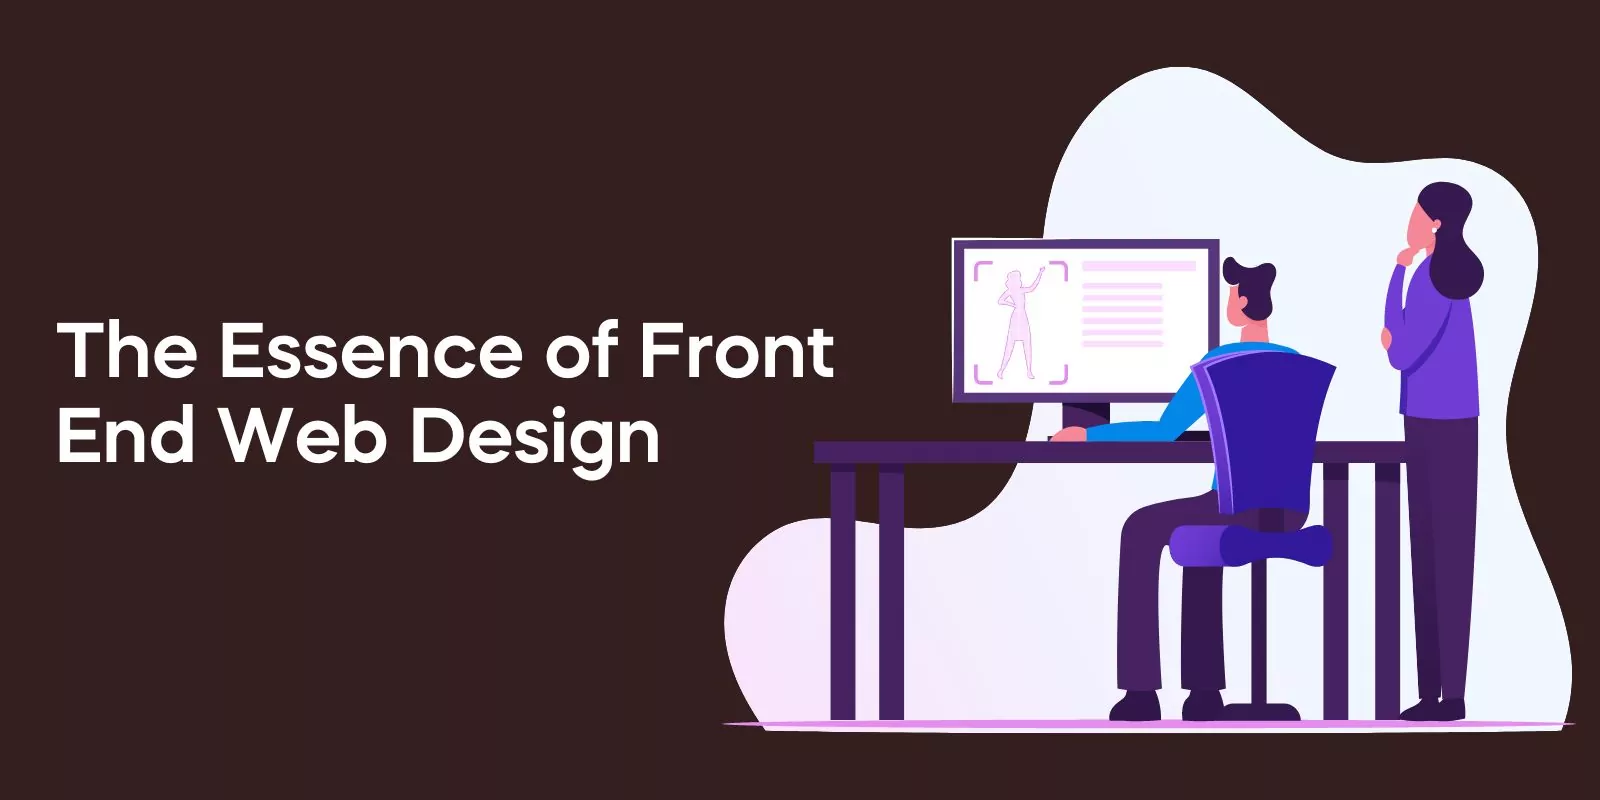 The Essence of Front End Web Design